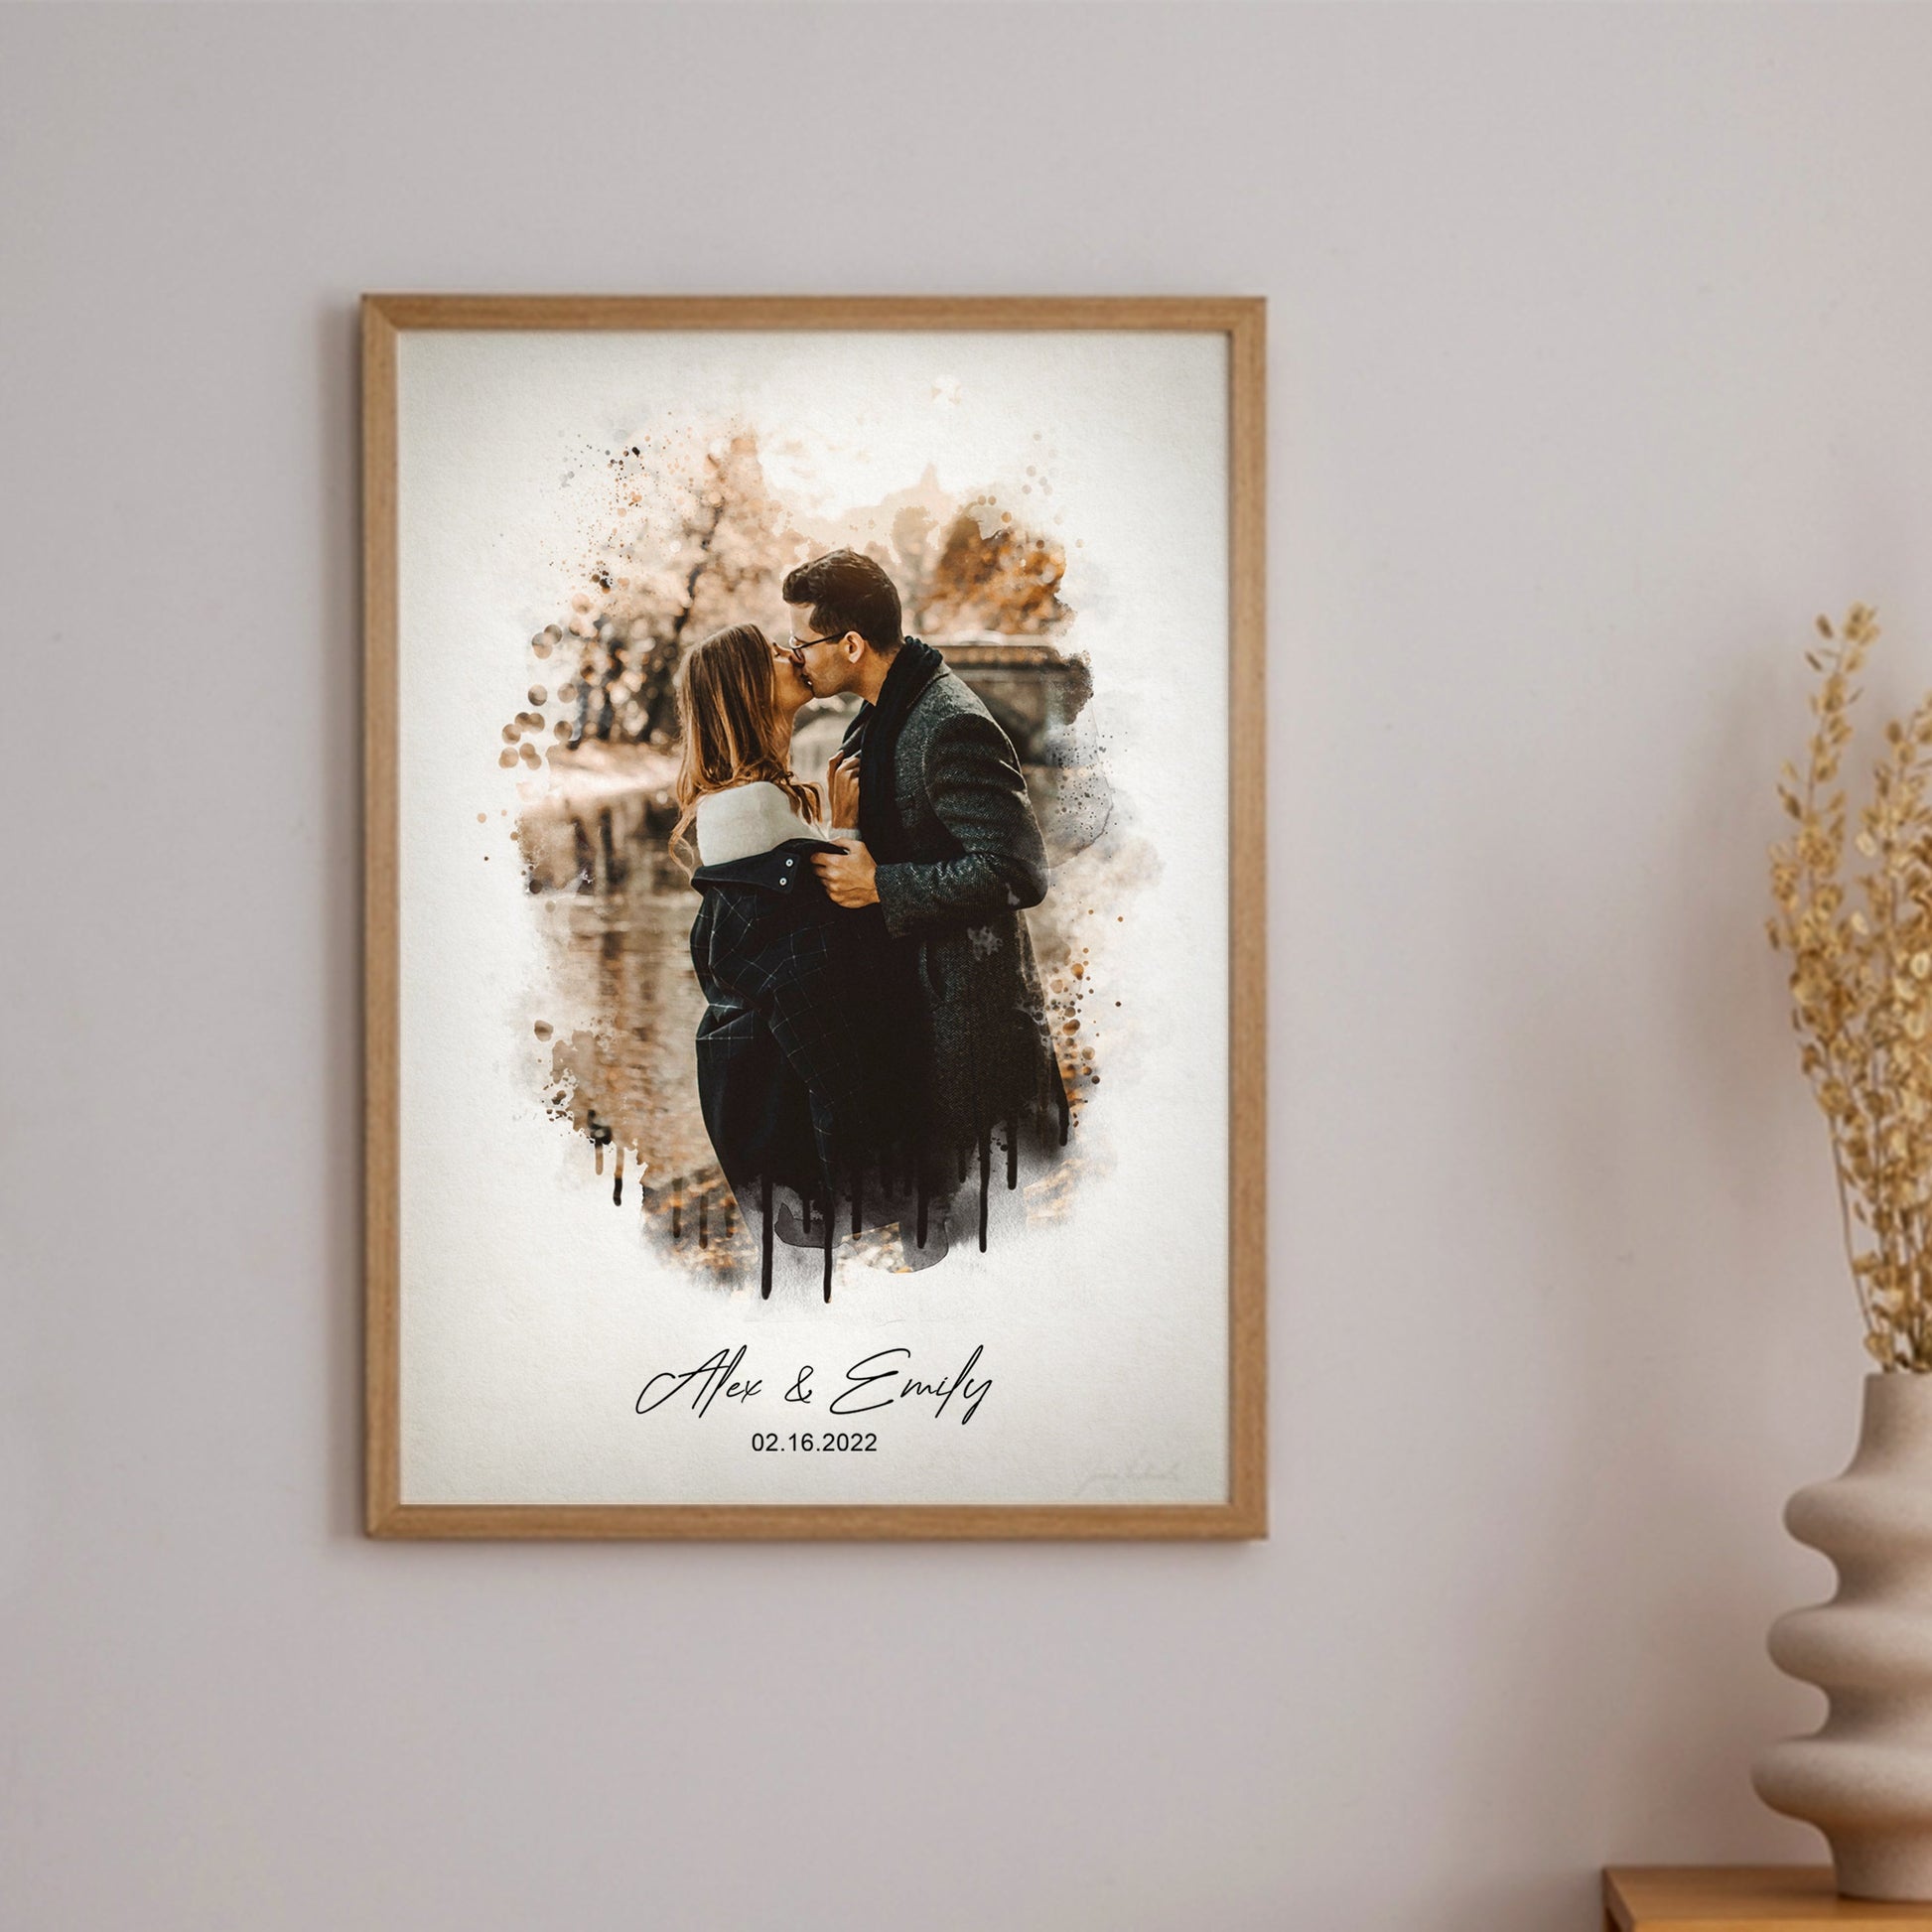 Happy couple embraces, framed canvas on wall, meaningful gift.